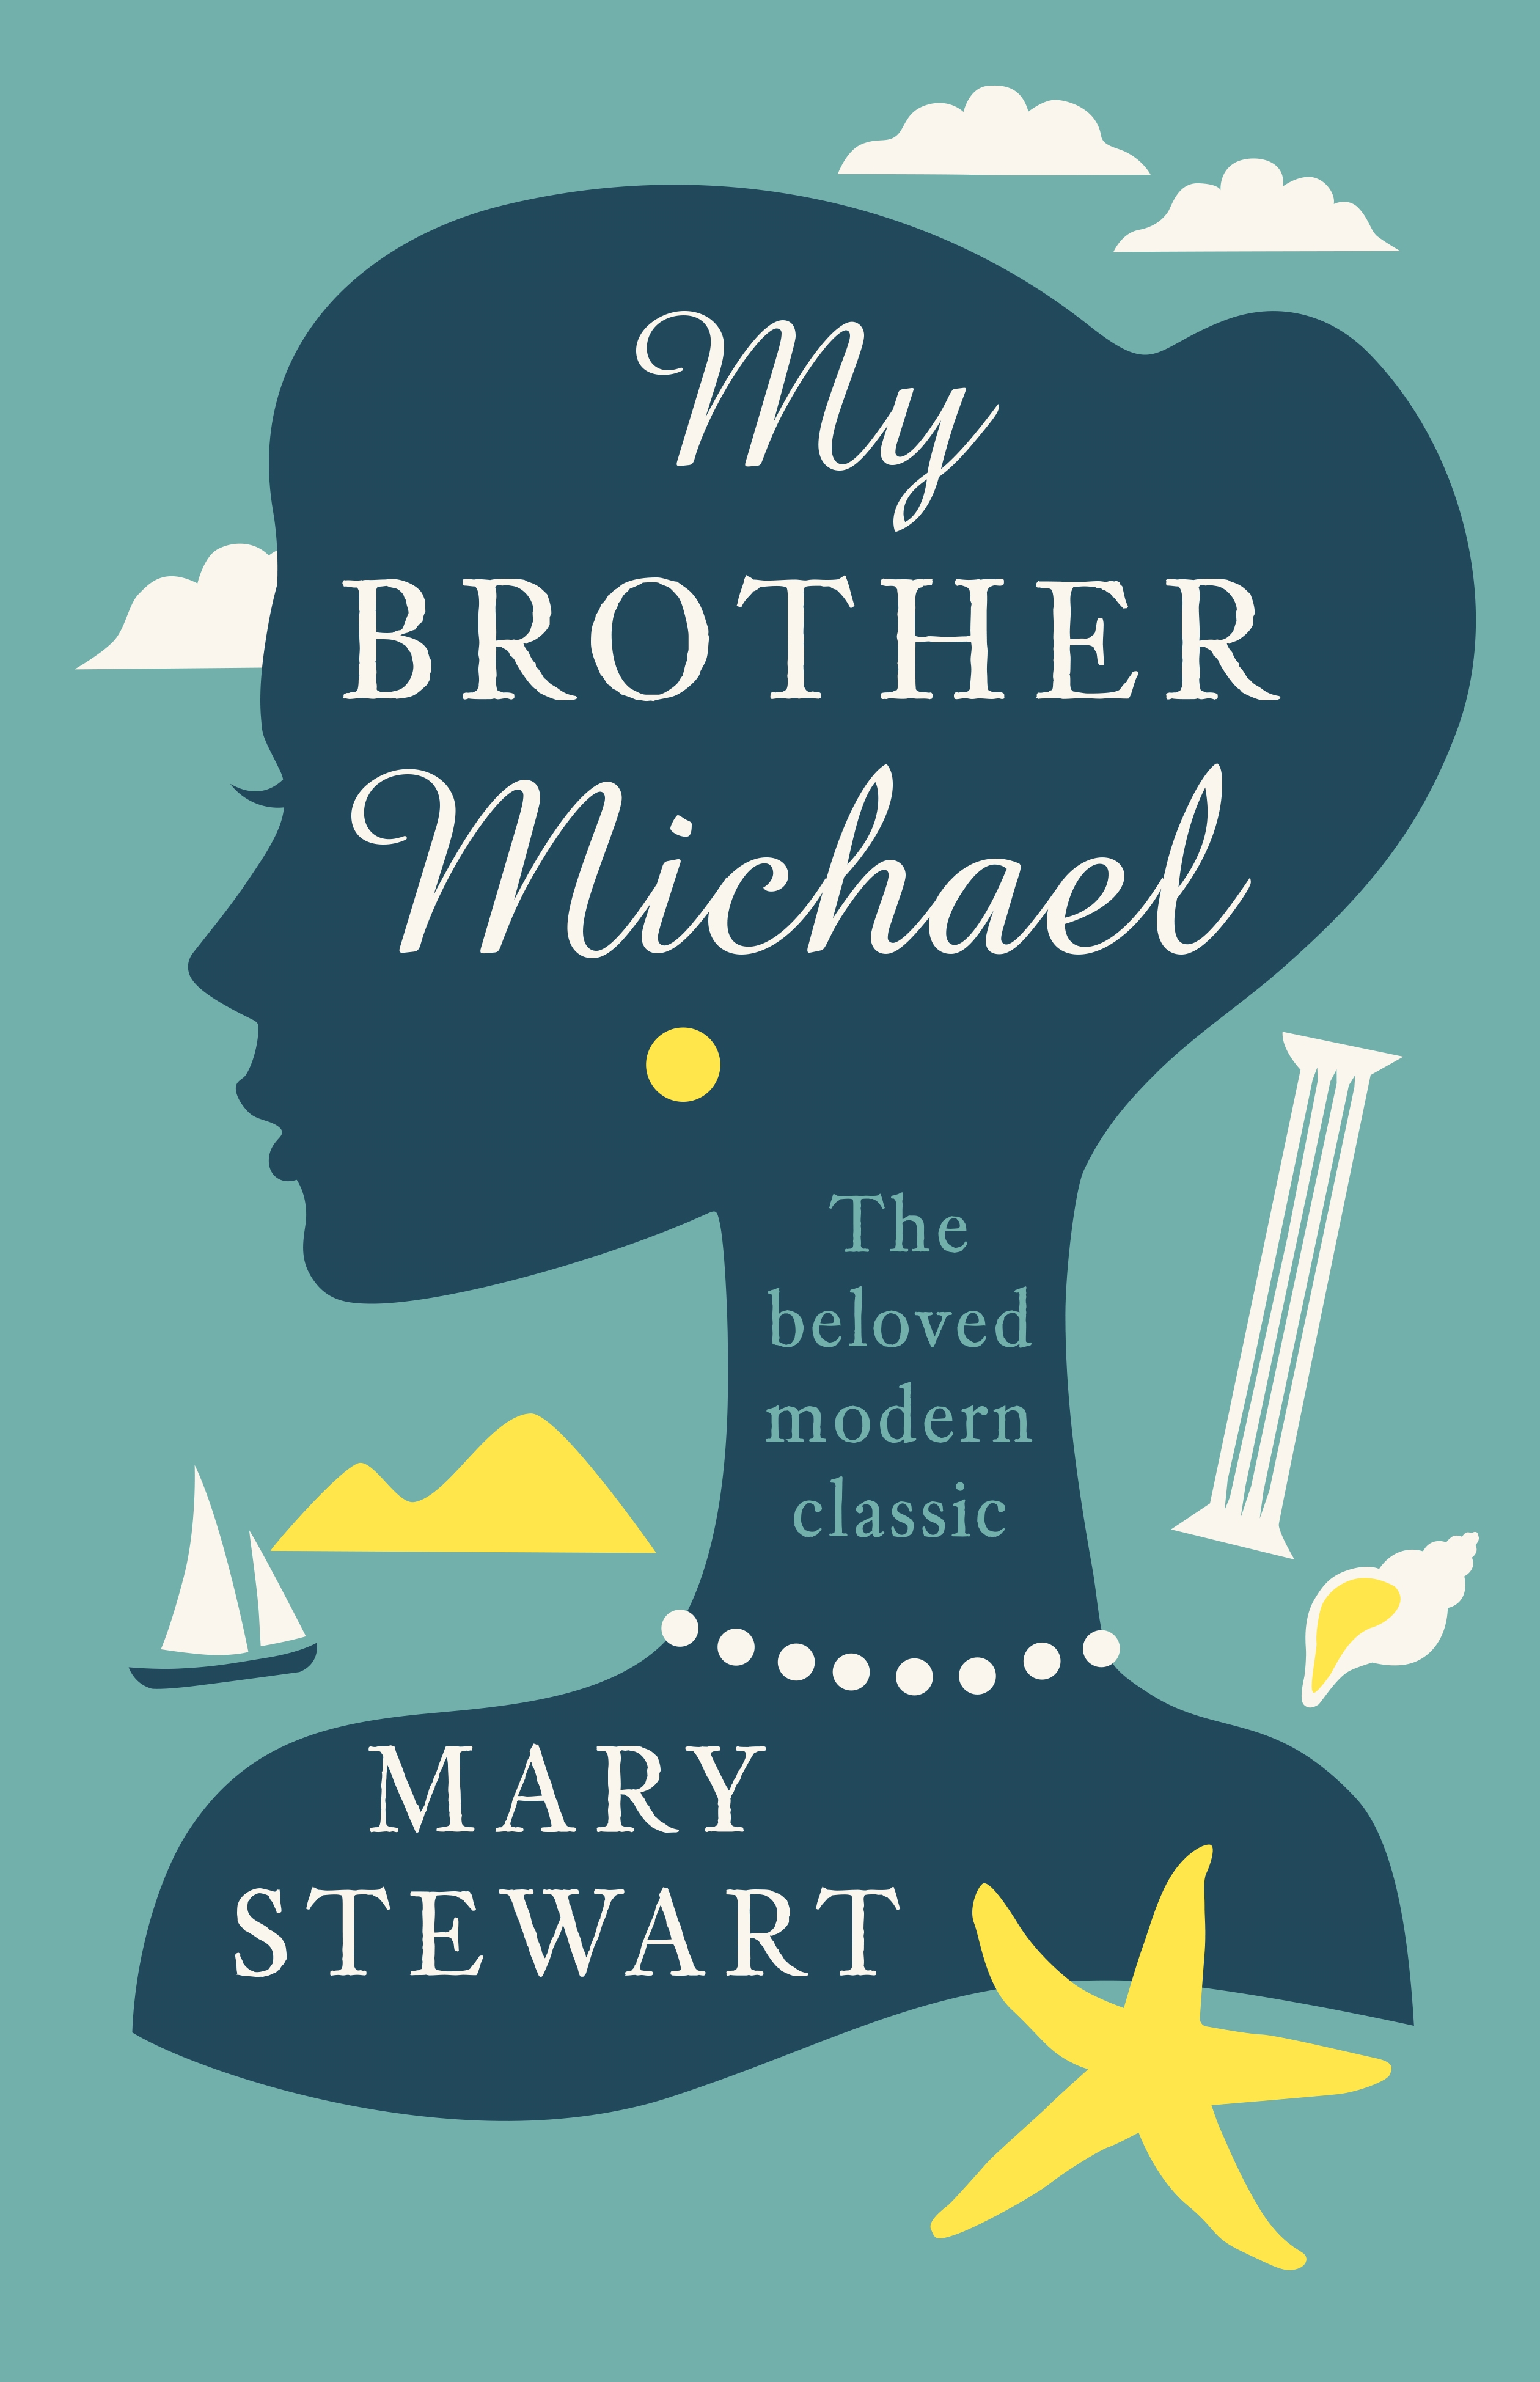 My Brother Michael by Mary Stewart